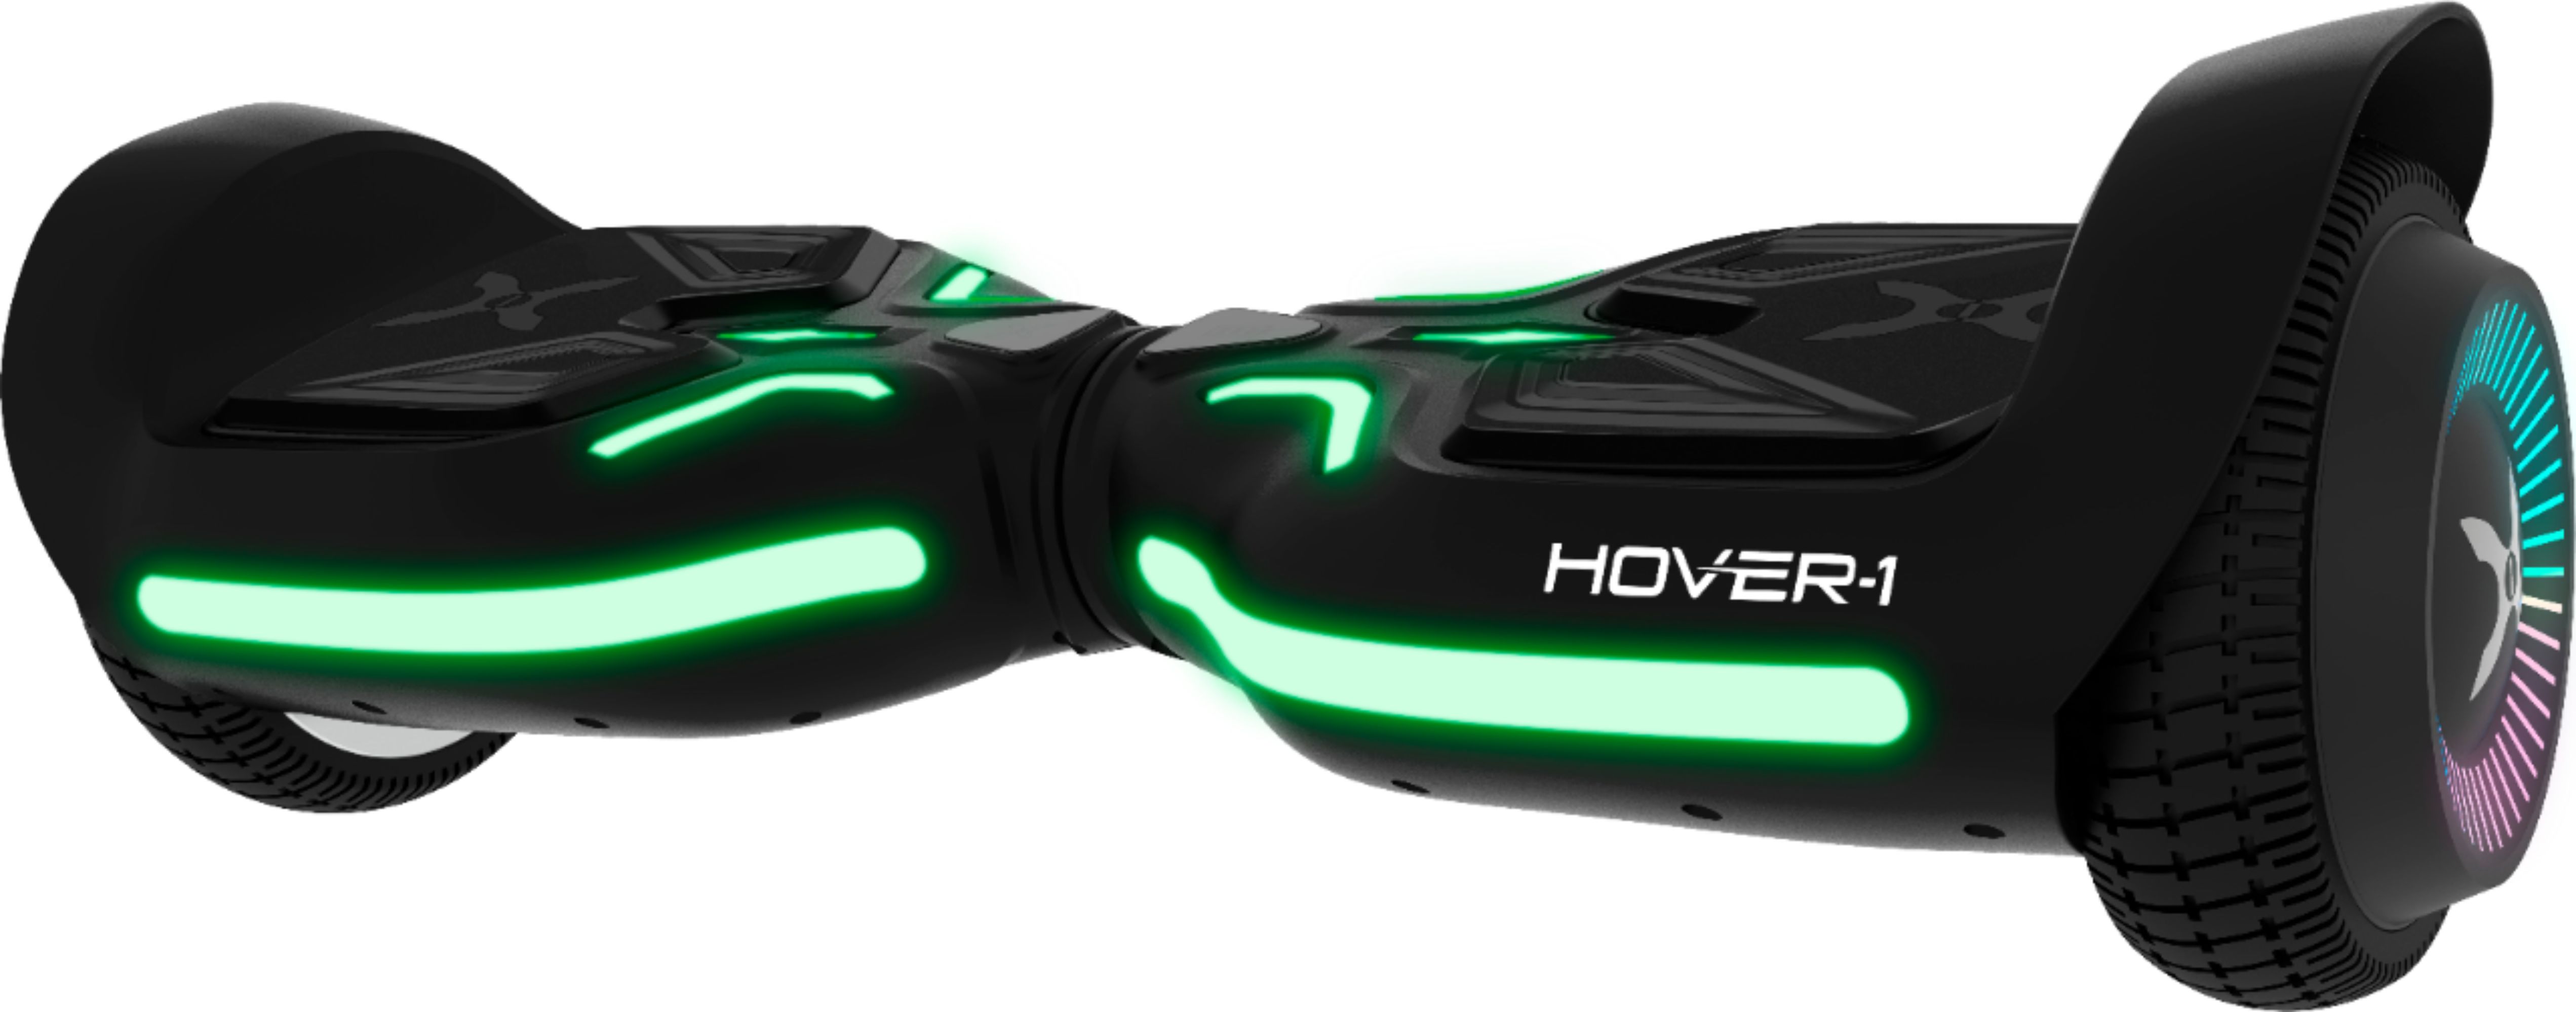 Hover-1 Superfly Electric Self-Balancing Scooter $120 + free s/h